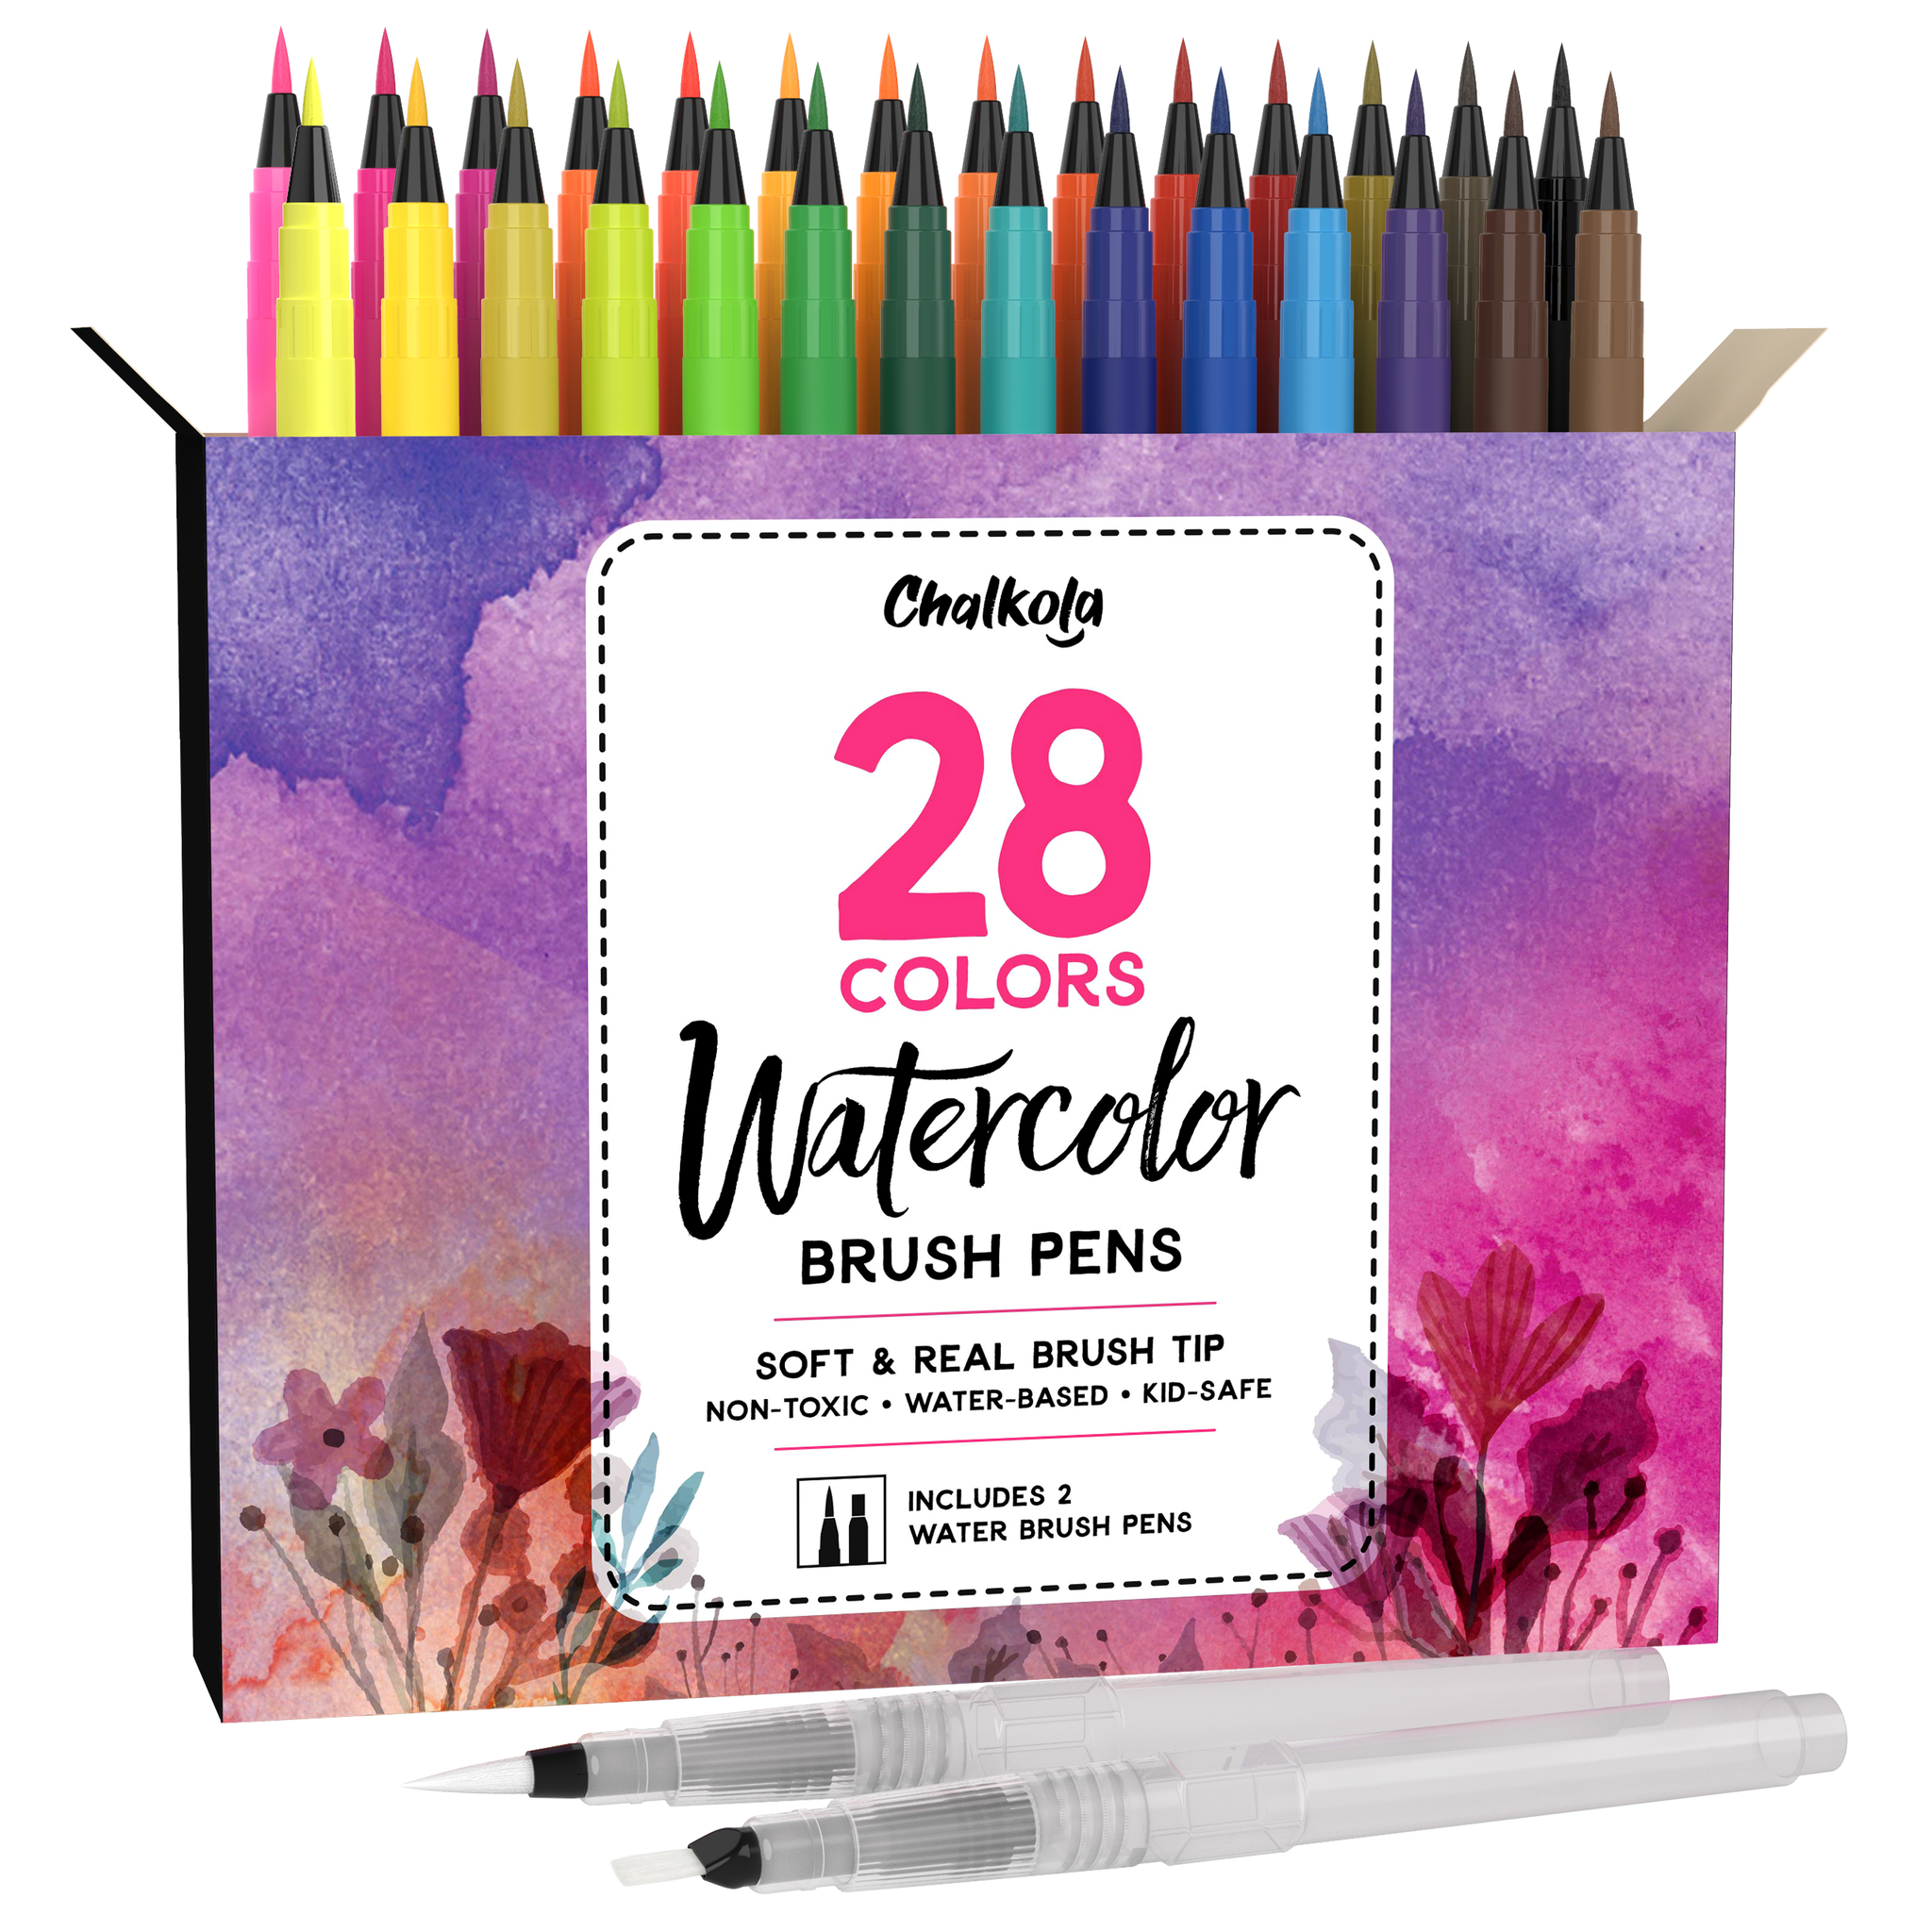 Watercolor Brush Pens Kit - 24 Markers with Paper Pad